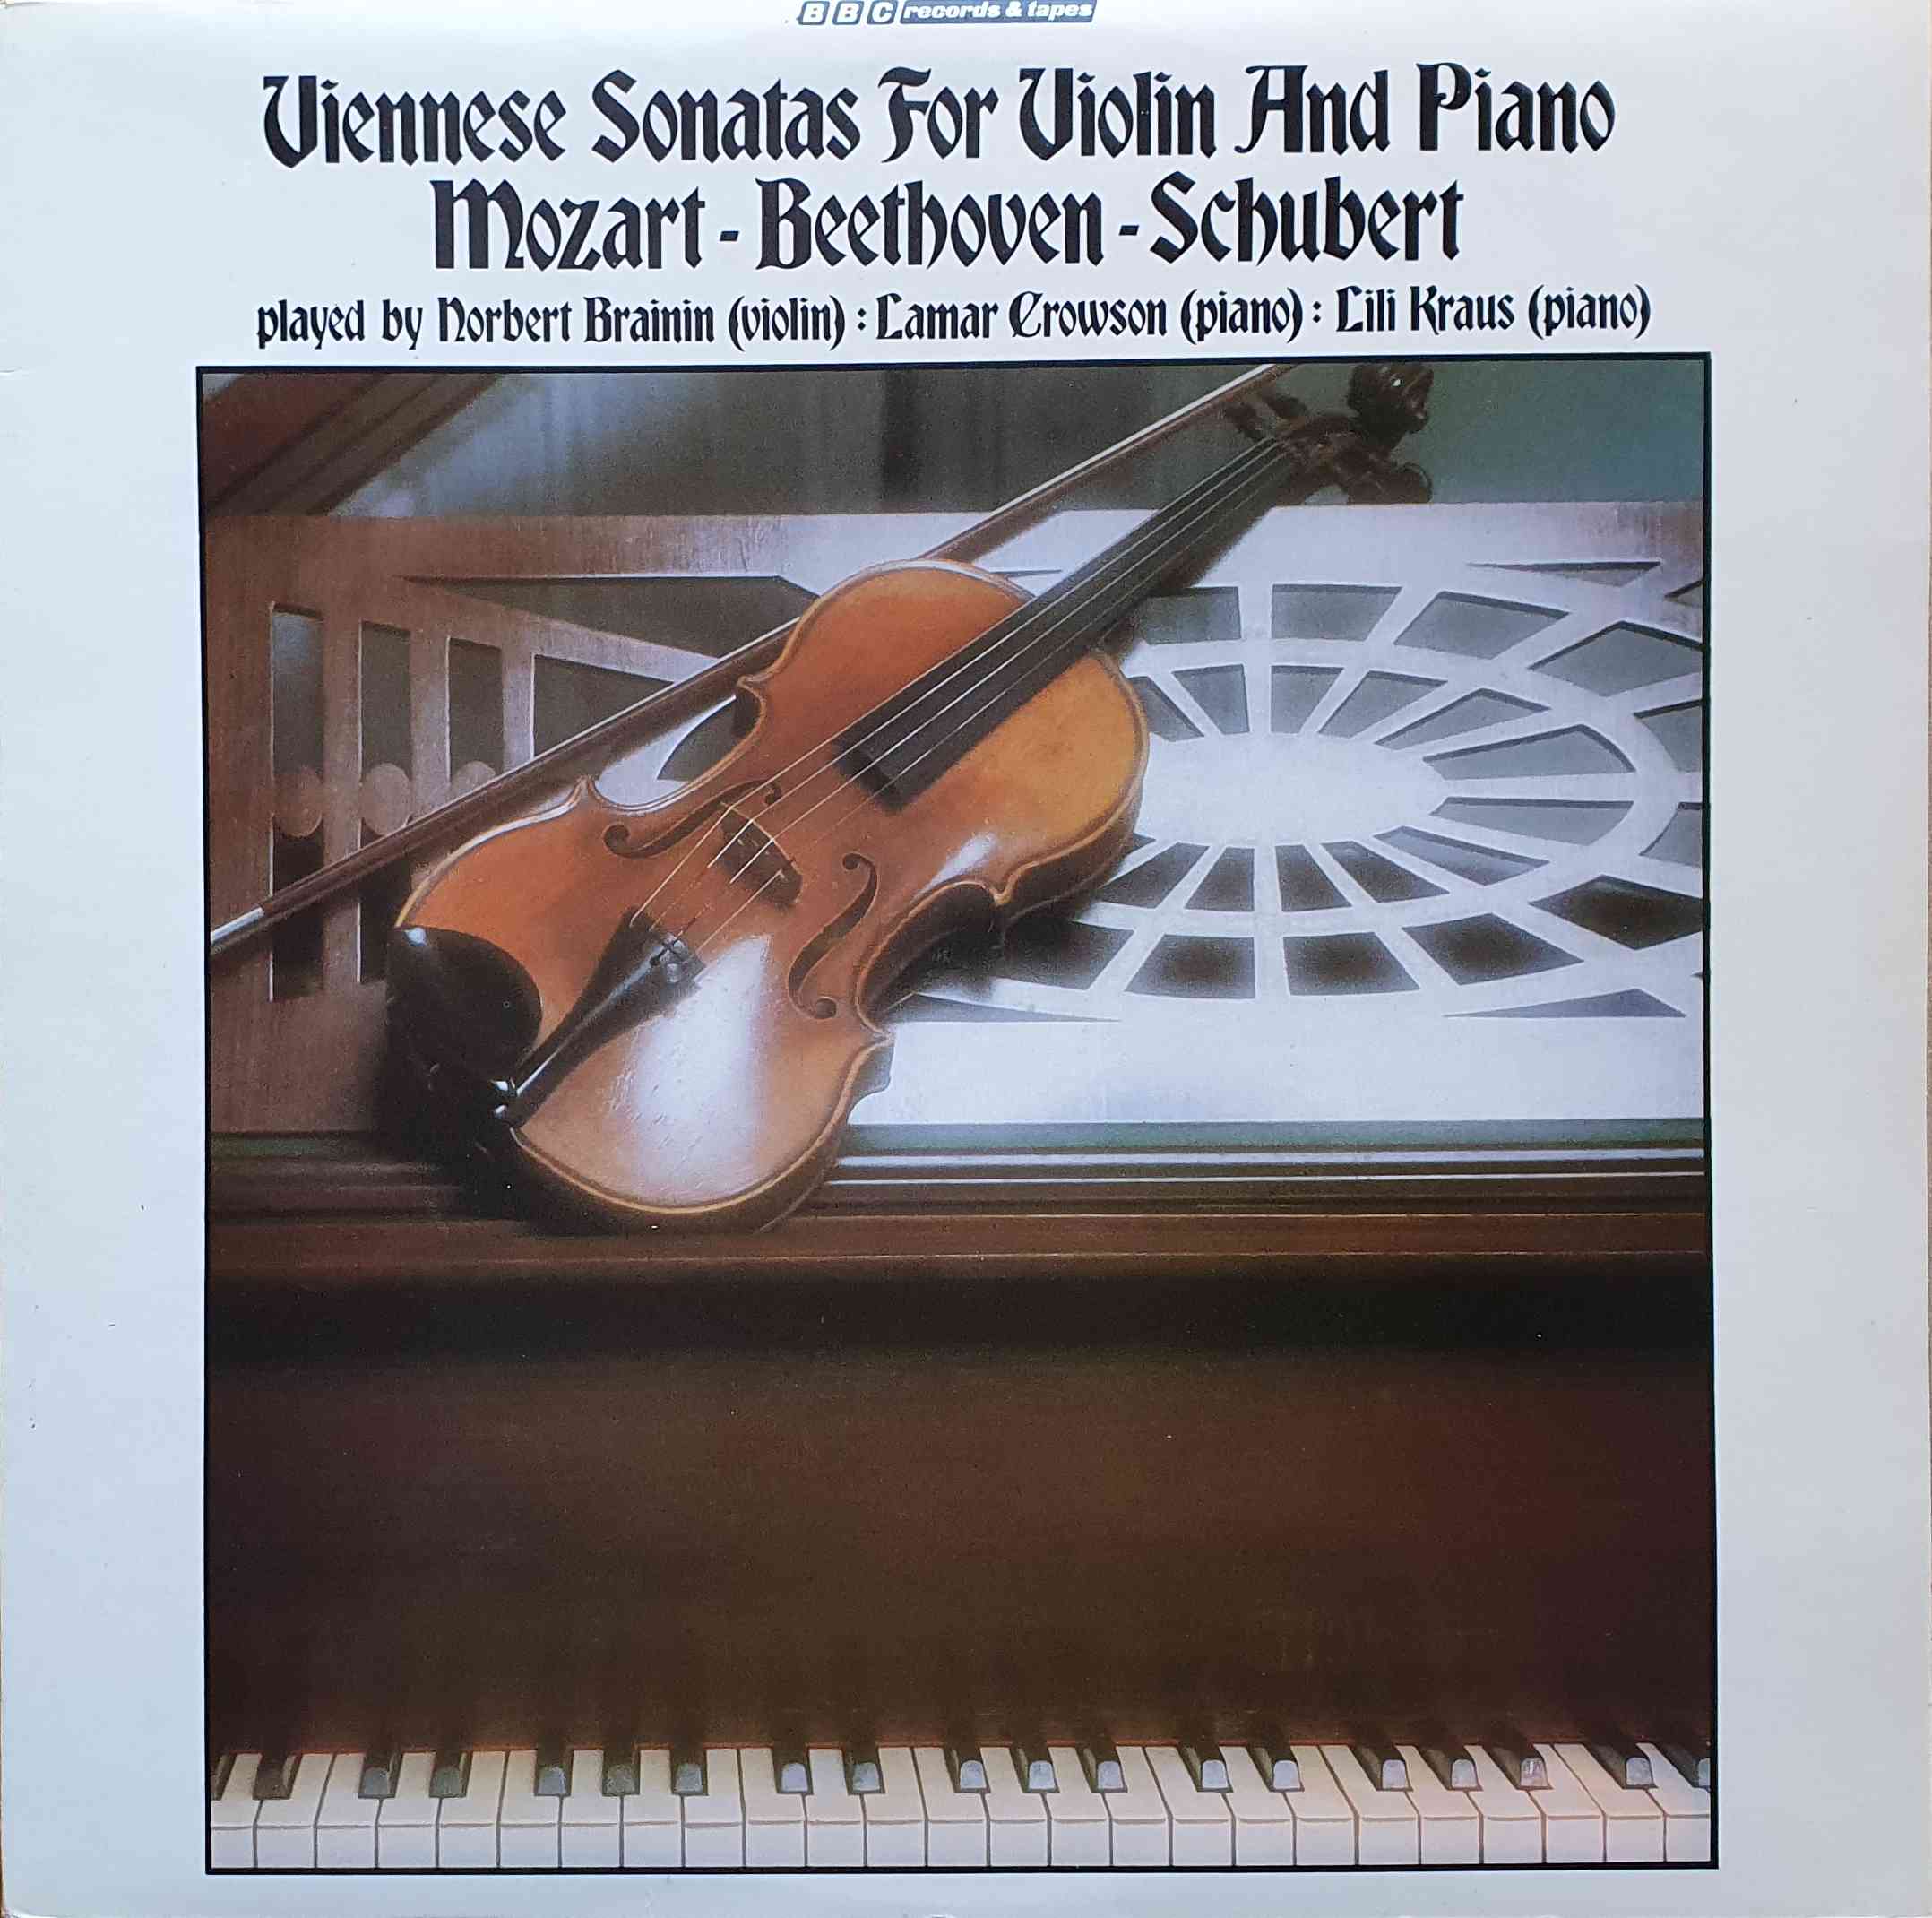 Picture of REF 313 Viennese sonatas for violin and piano by artist Mozart / Schubert / Beethoven from the BBC albums - Records and Tapes library